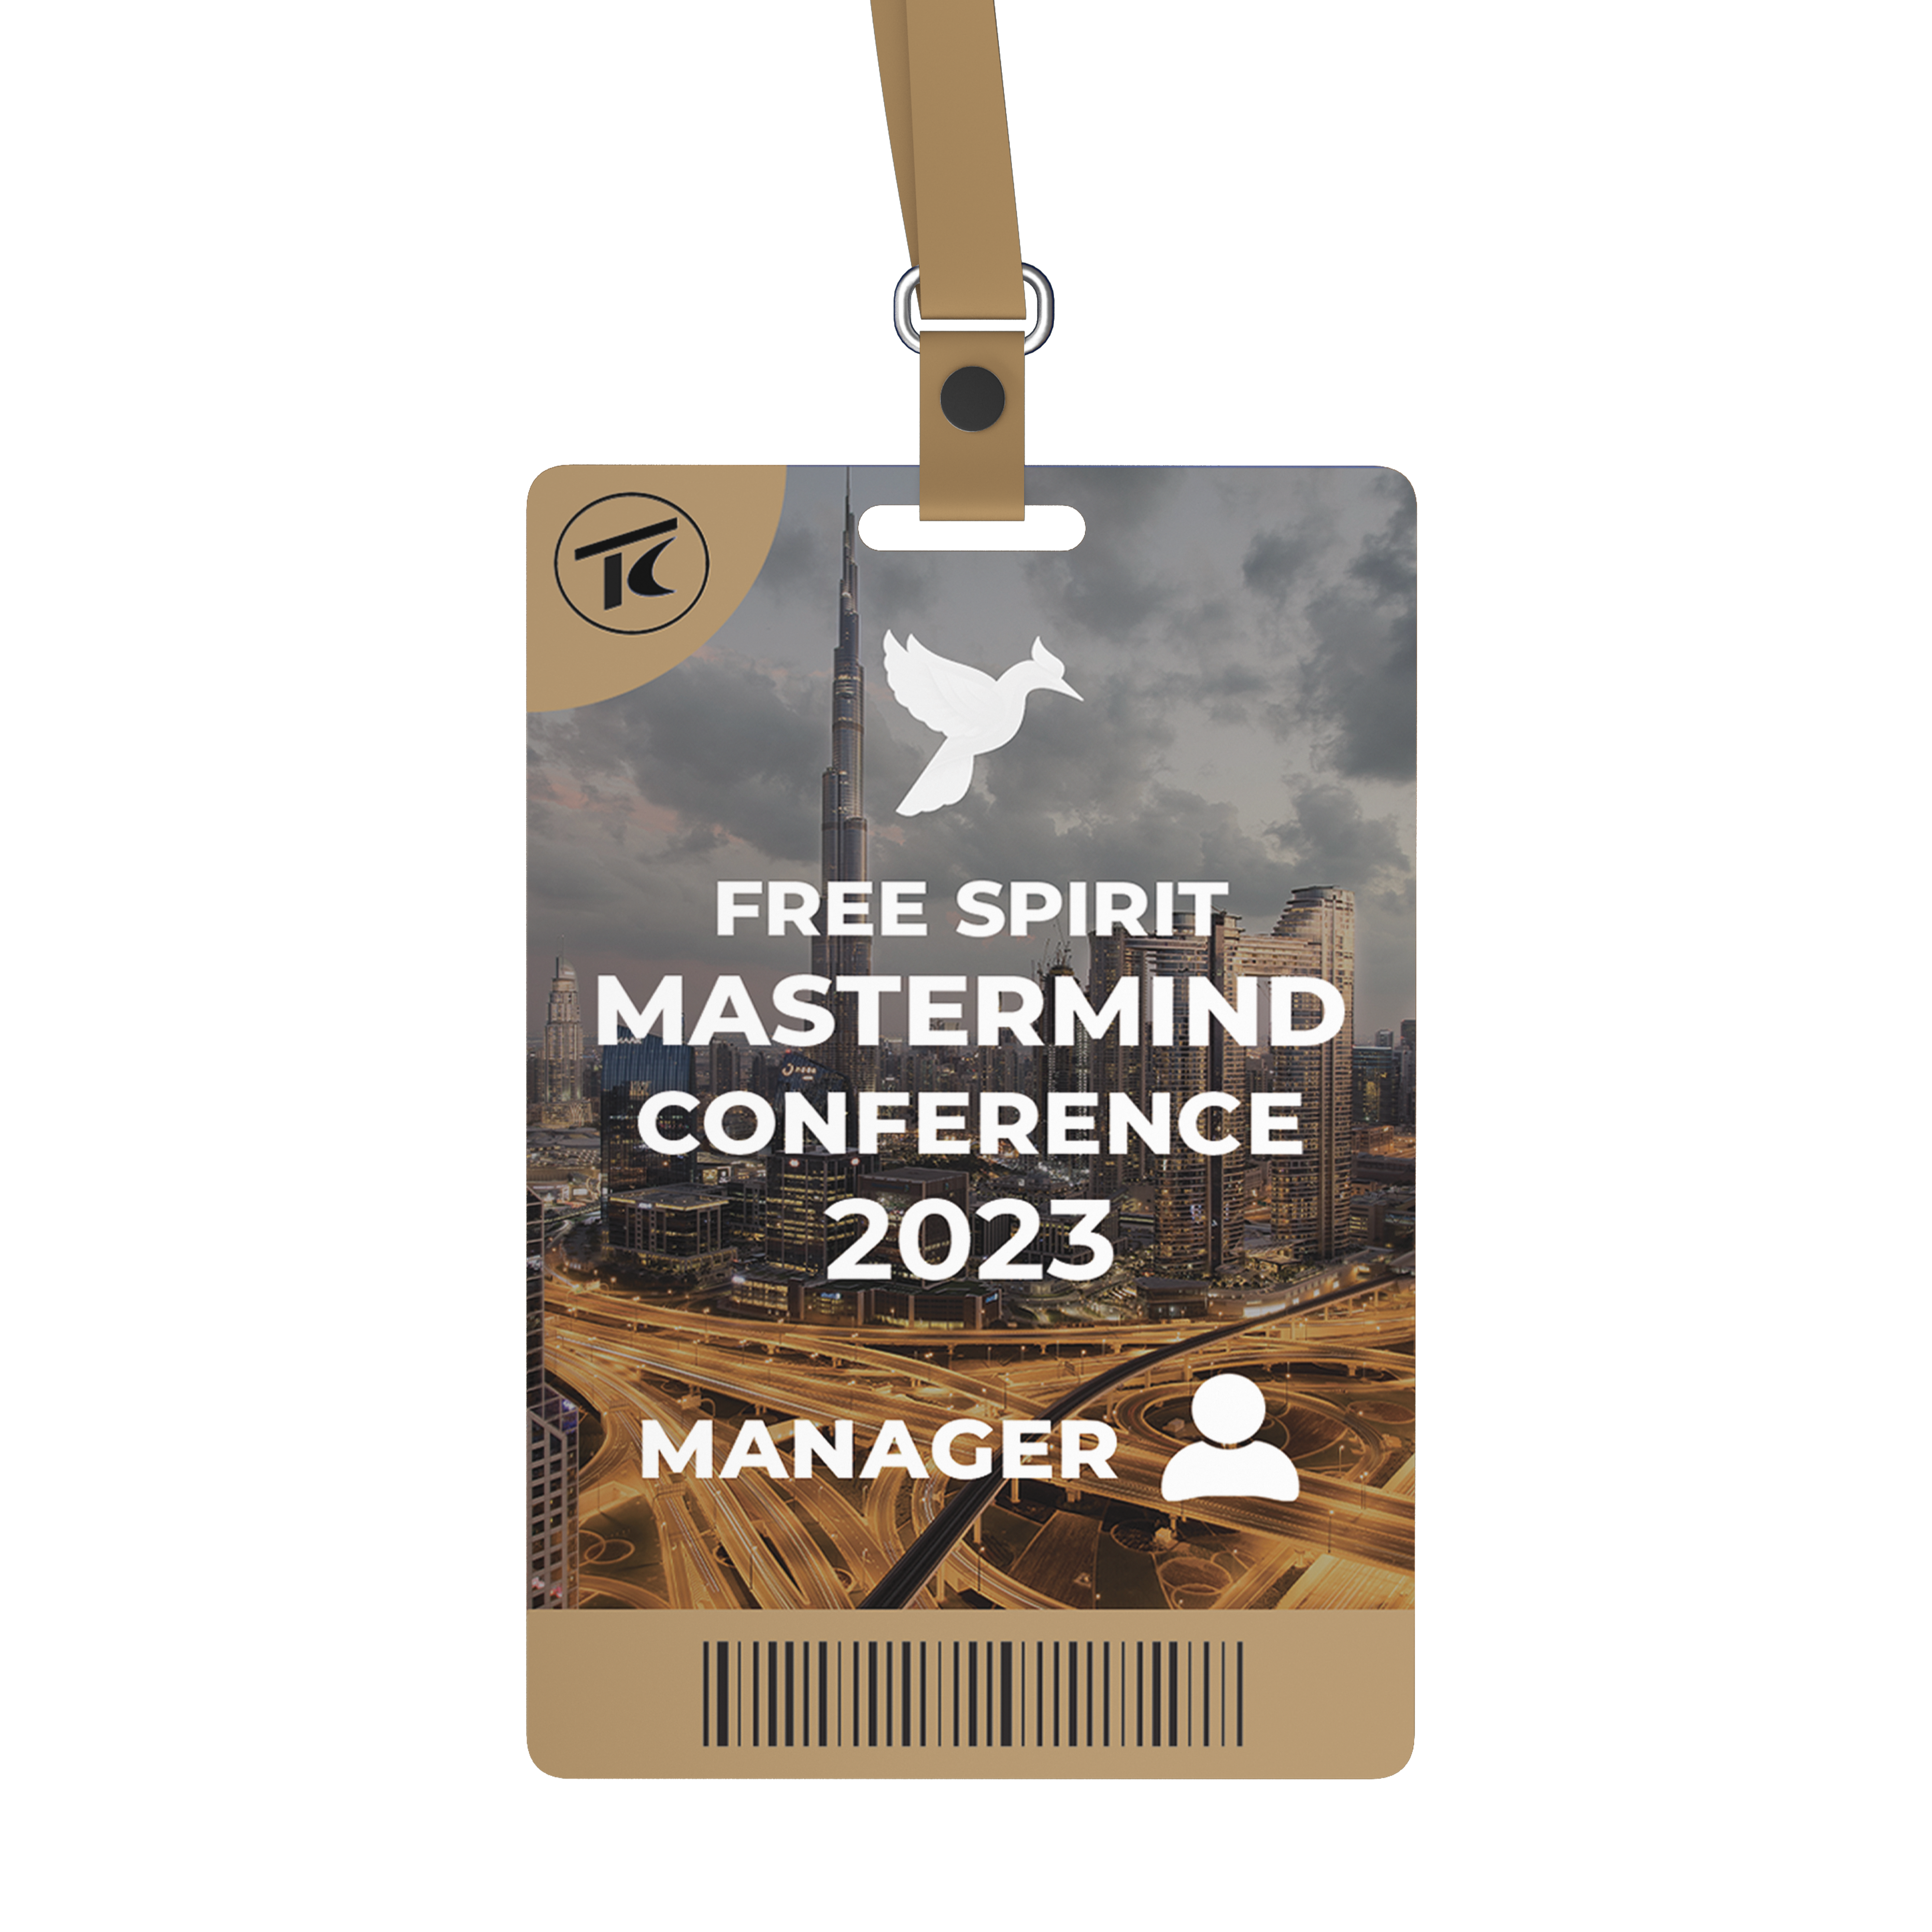 Free Spirit Mastermind Conference - Manager